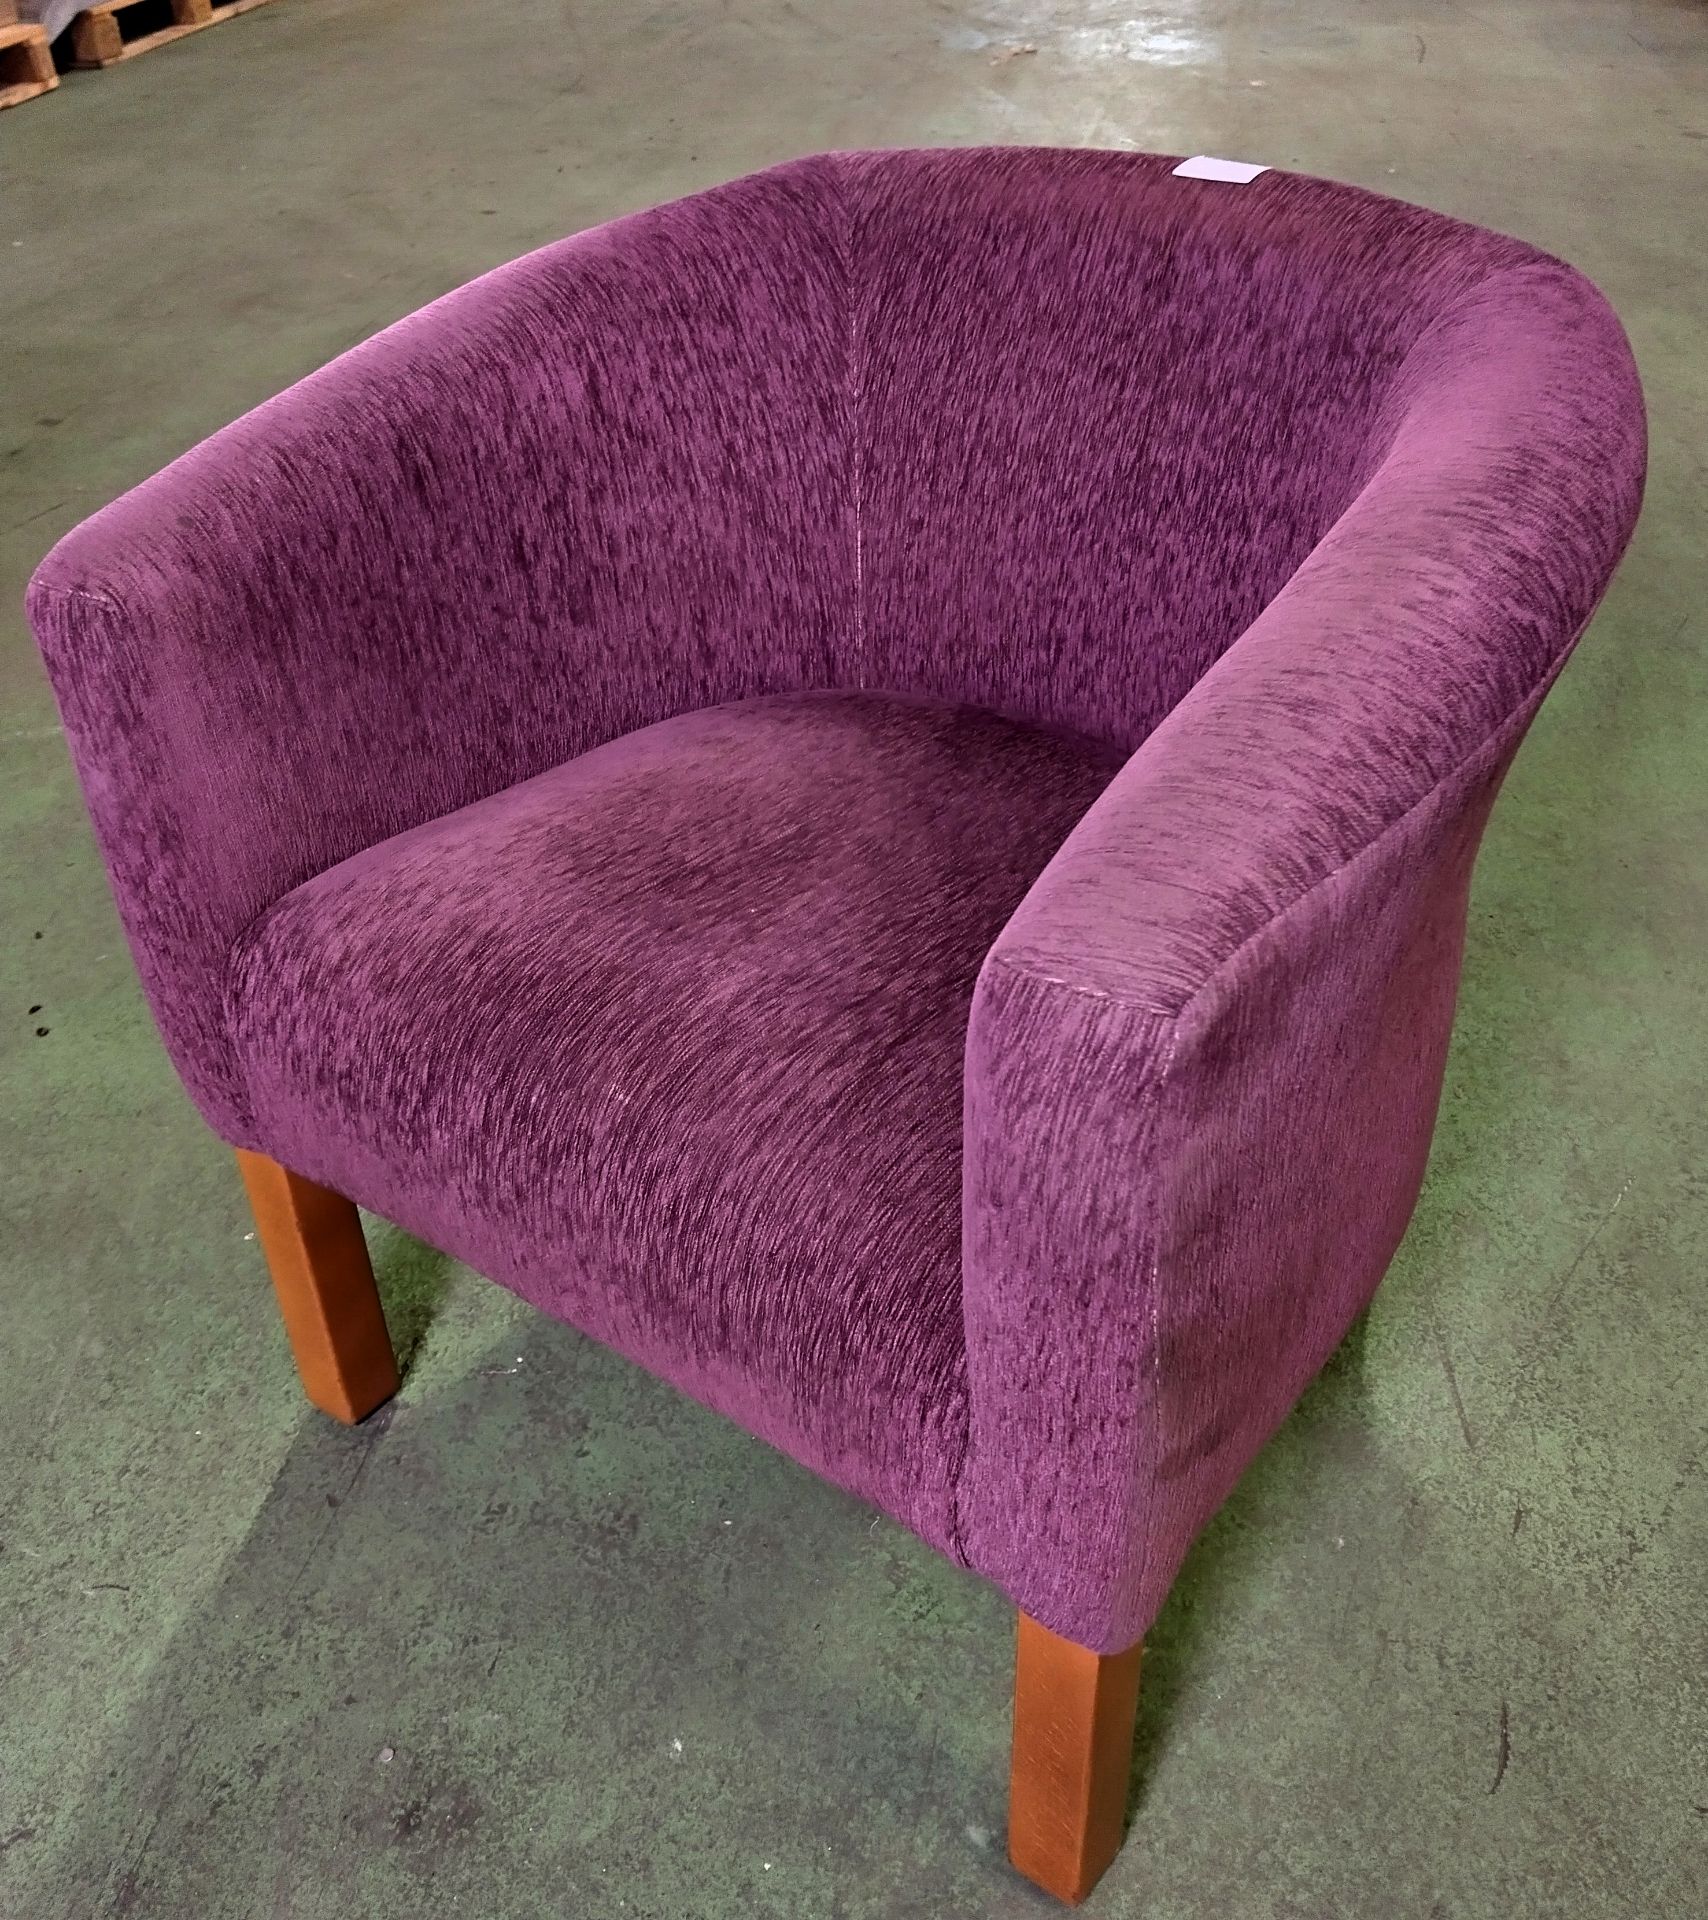 2x Purple upholstered arm chairs - worn in places - W 68 x D 68 x H 70cm Seat height 44cm - Image 2 of 3